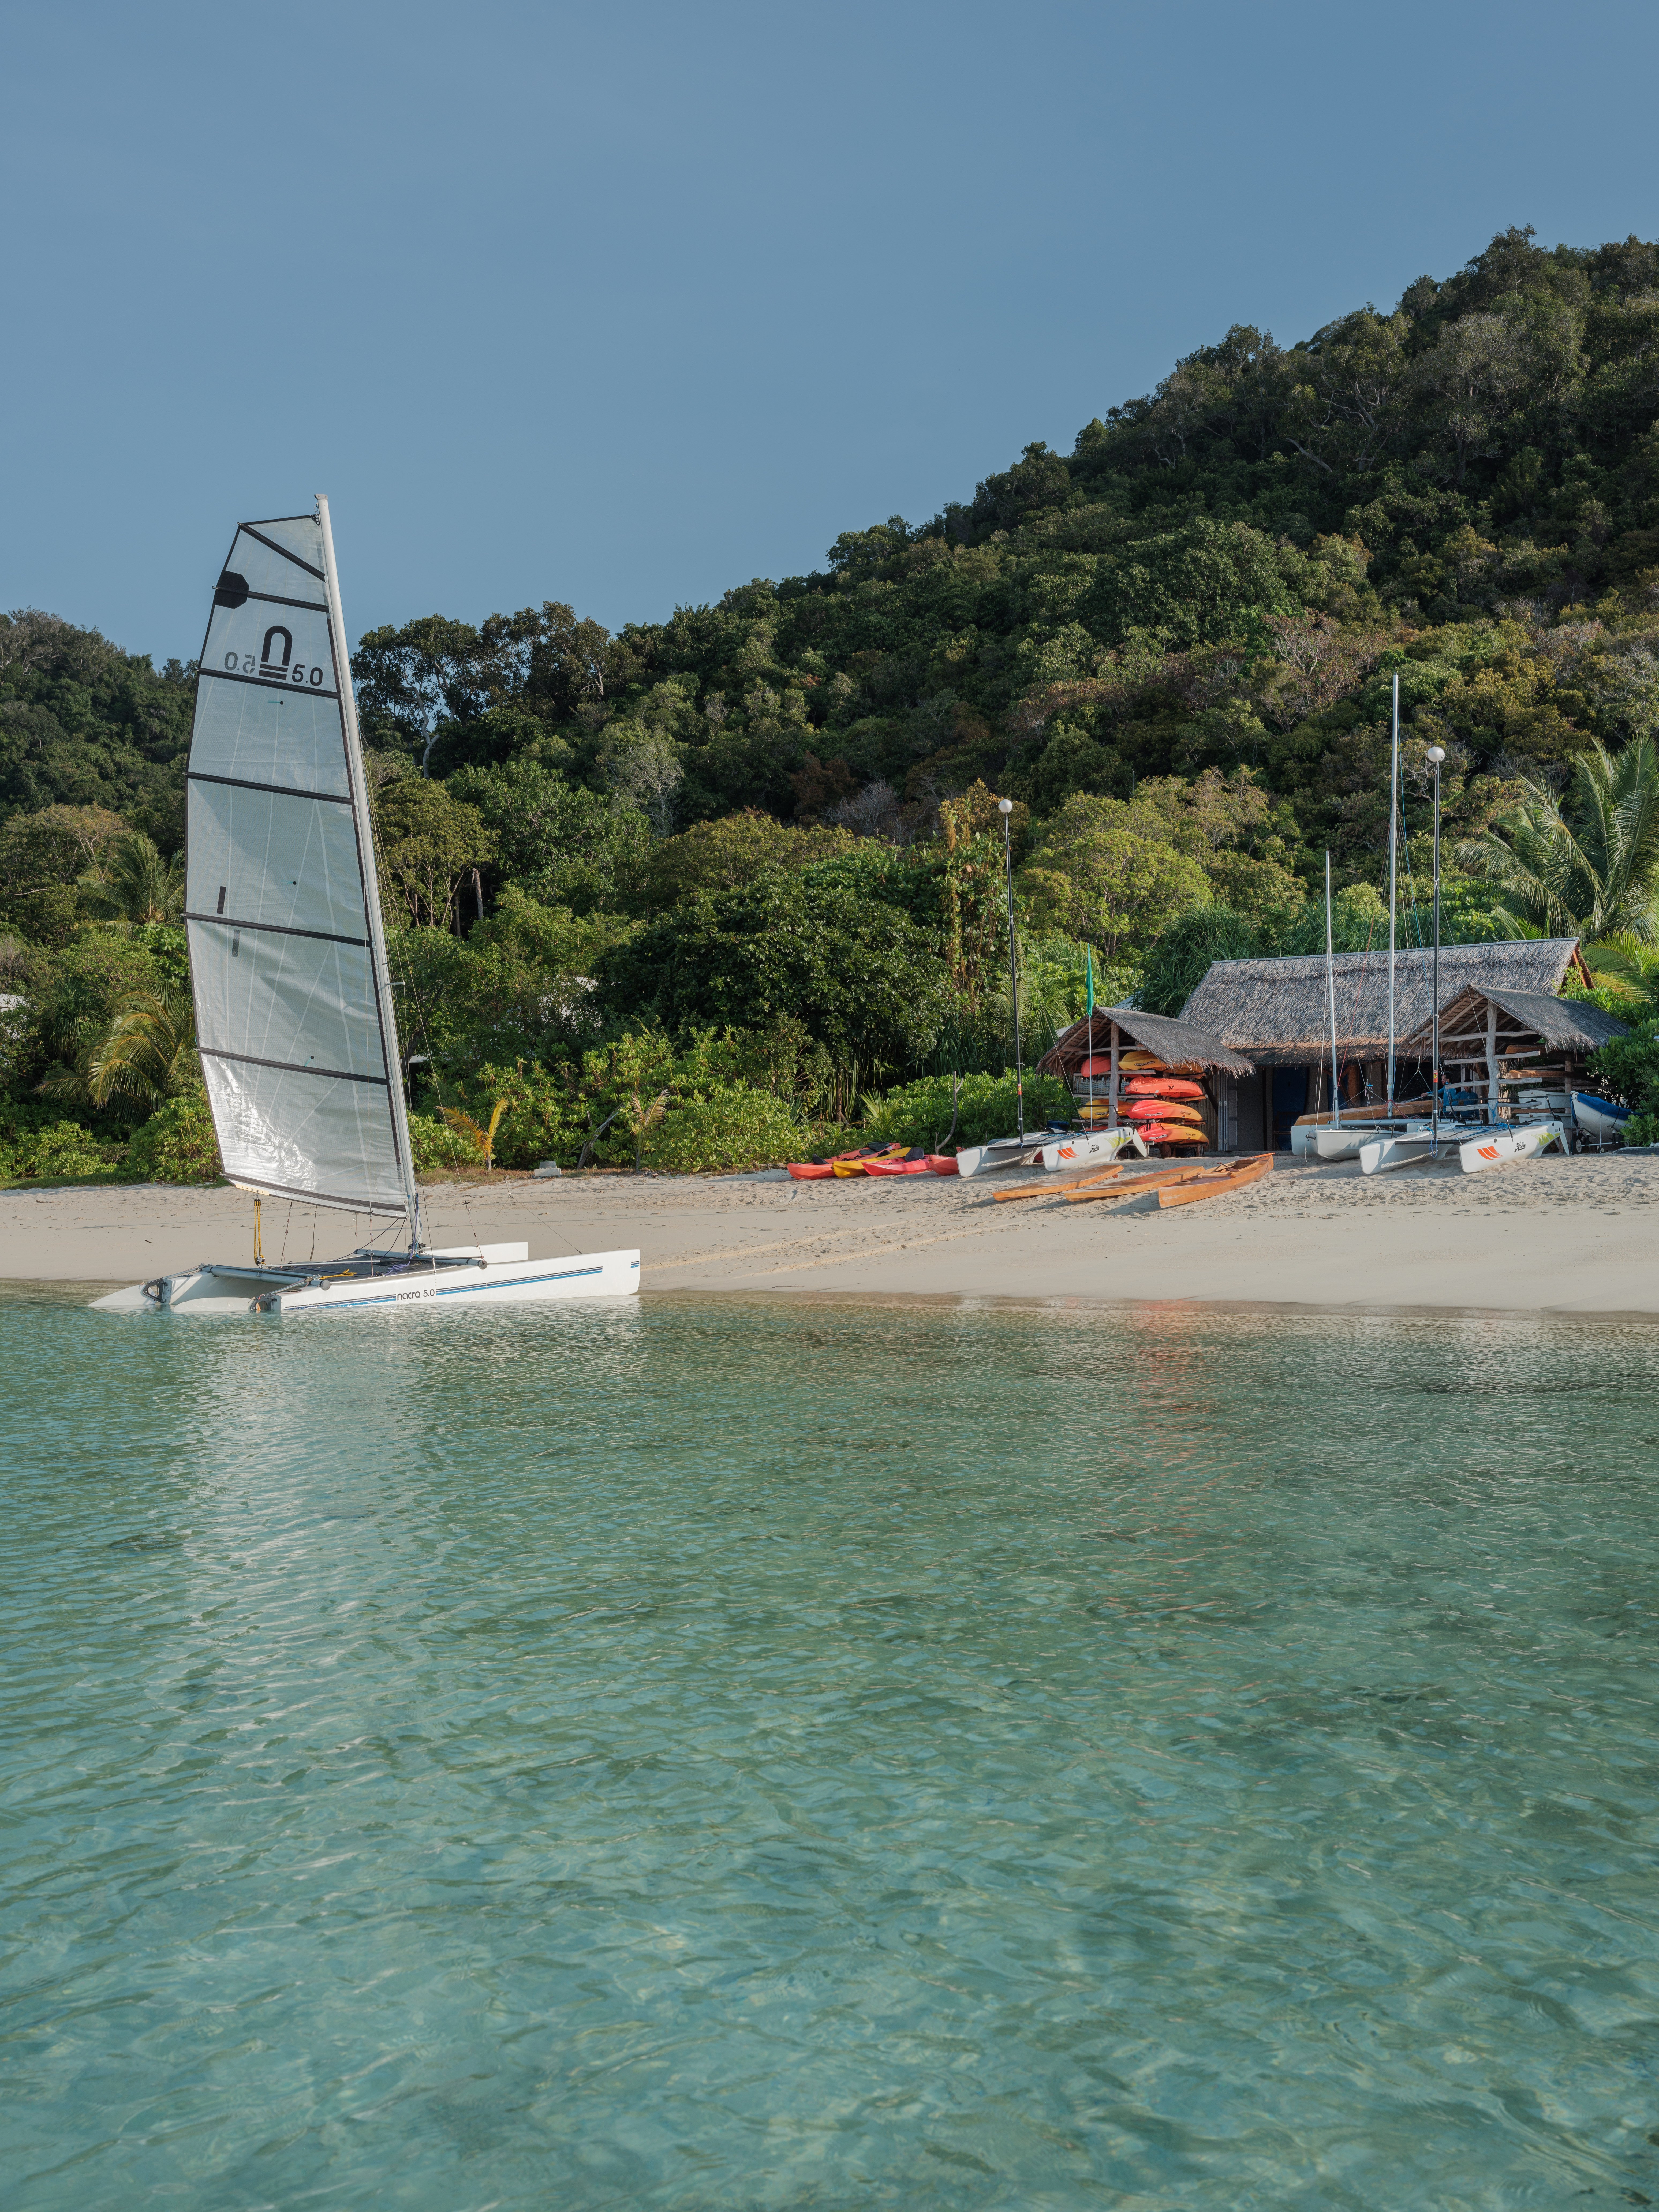 Bawah Reserve activities centre with paddle boards and kayaks for guests use